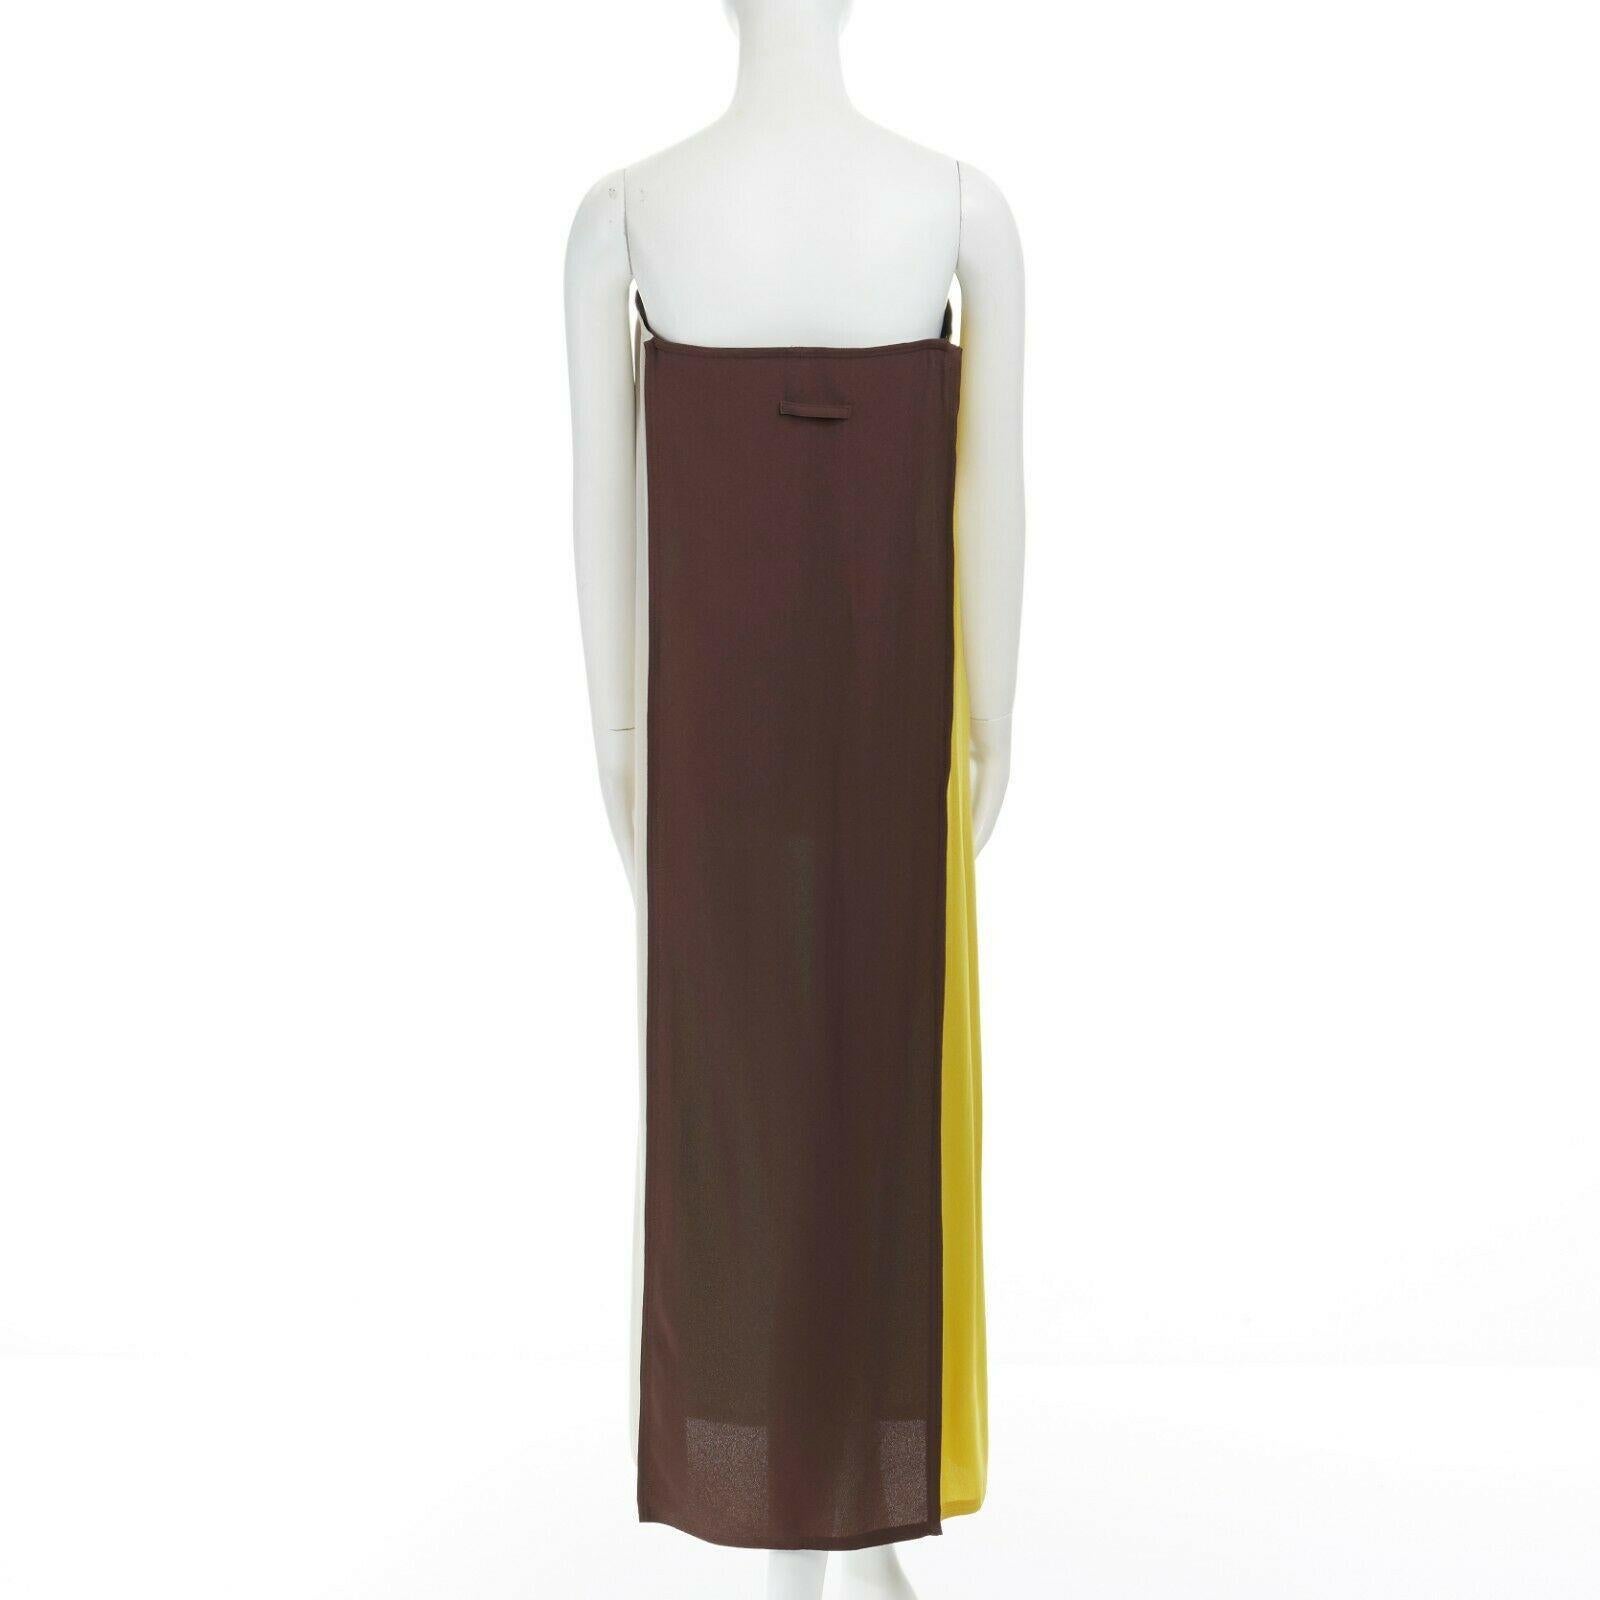 runway JEAN PAUL GAULTIER AW96 color blocked structured bust boxy dress IT40 2